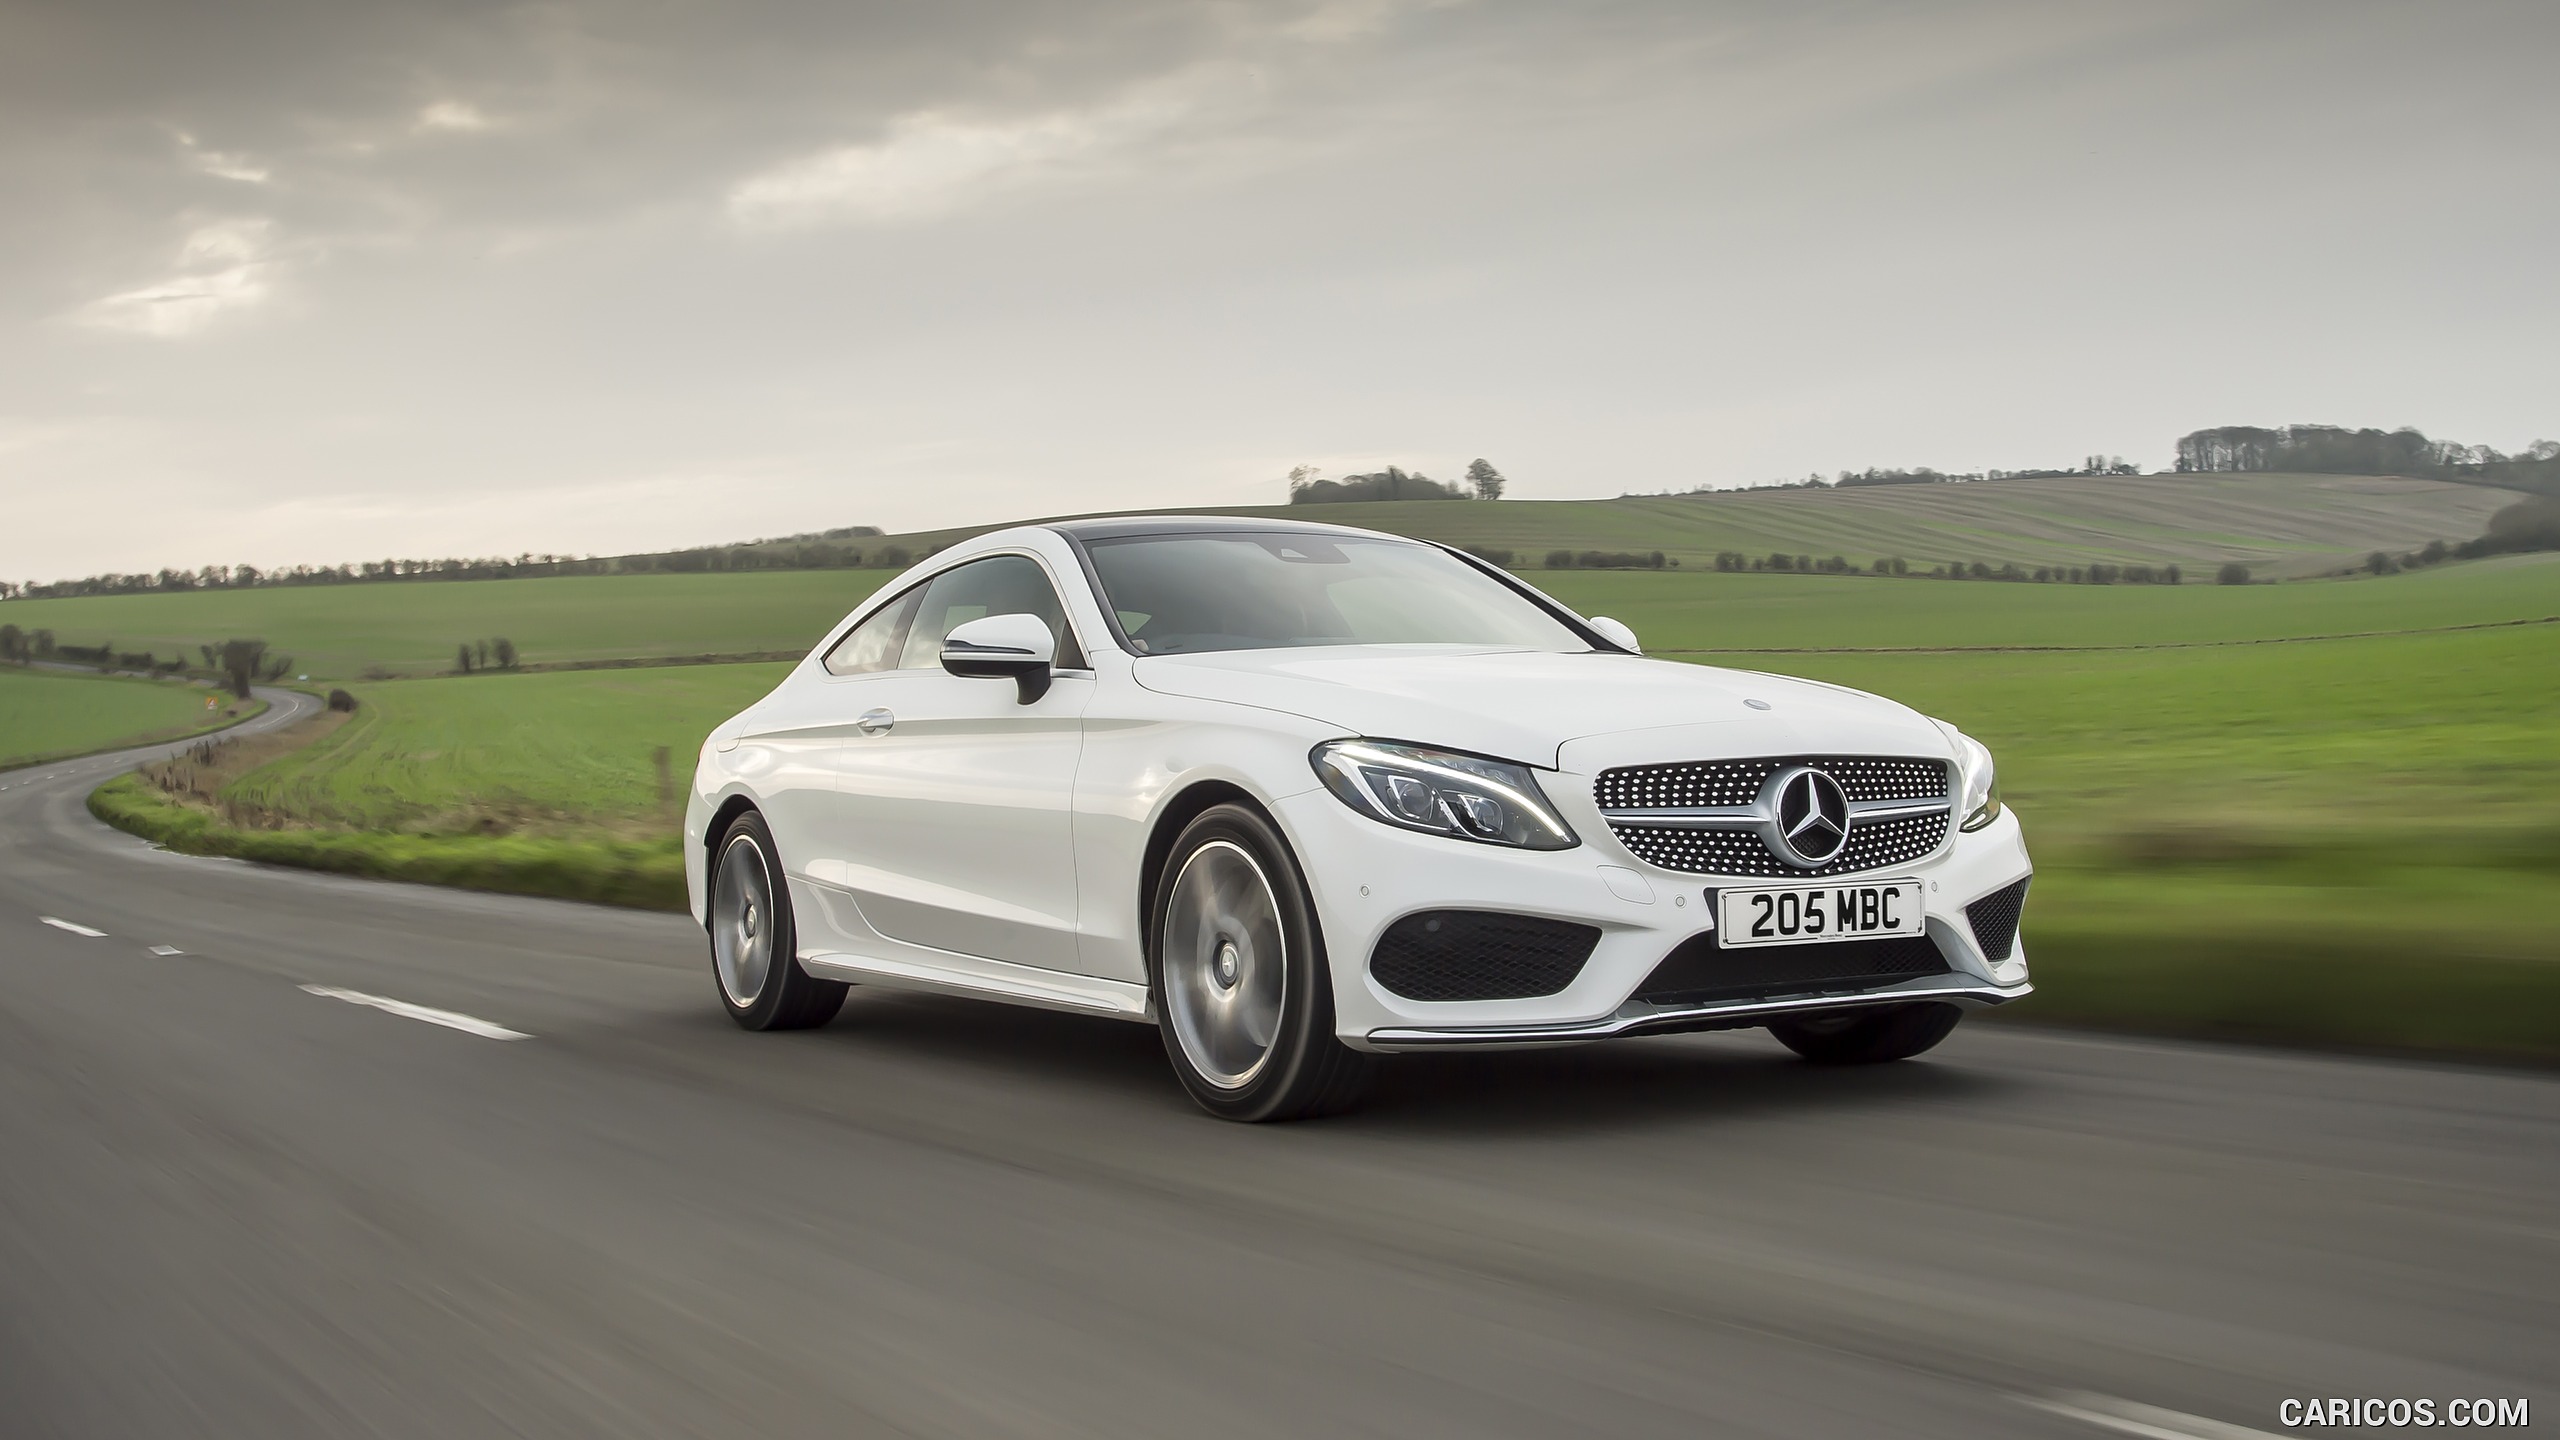 2017 Mercedes-Benz C-Class Coupe (UK-Spec) - Front, #128 of 210